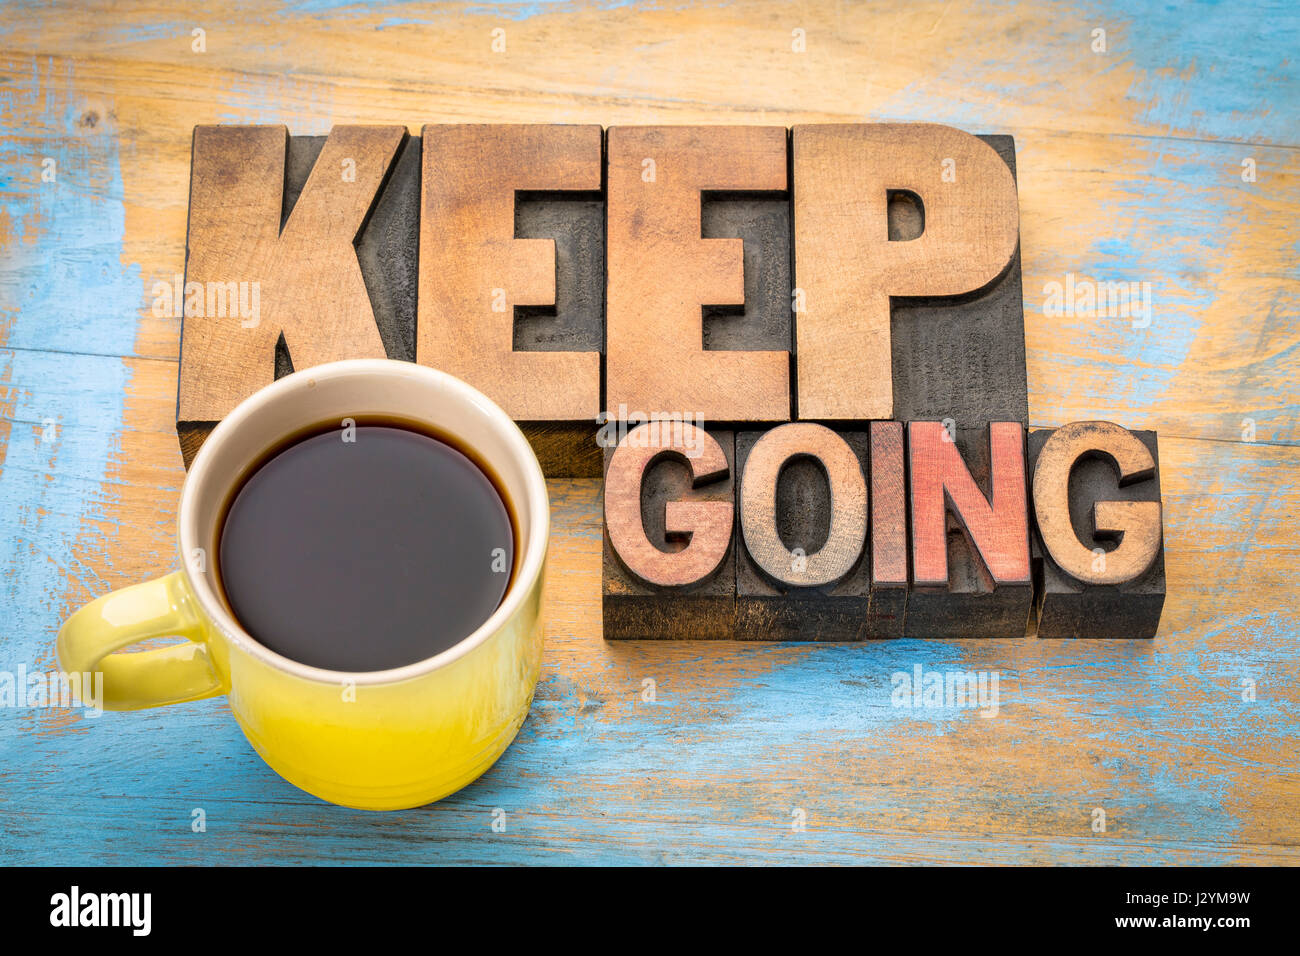 Keep going motivation word abstract in vintage letterpress wood type blocks with a cup of coffee Stock Photo